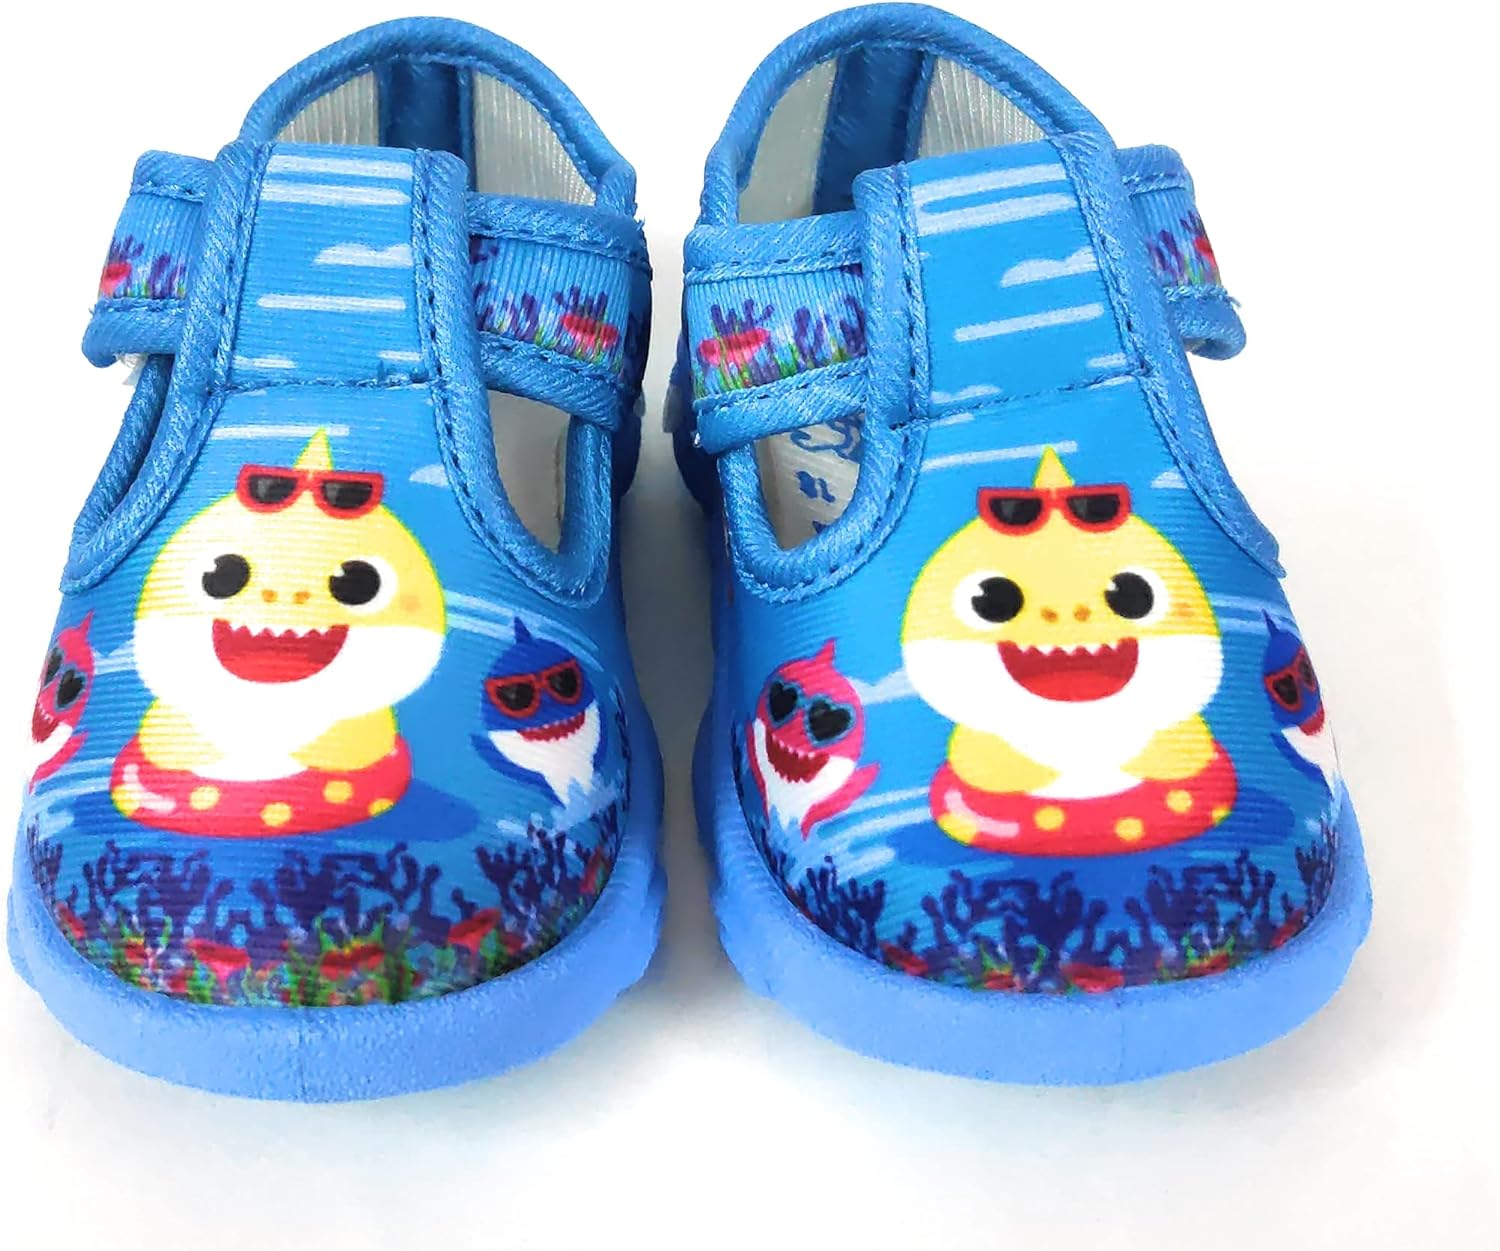 Coolz Kids Chu-Chu Sound Musical First Walking Shoes Star-7 for Baby Boys and Baby Girls for 9-24 Months